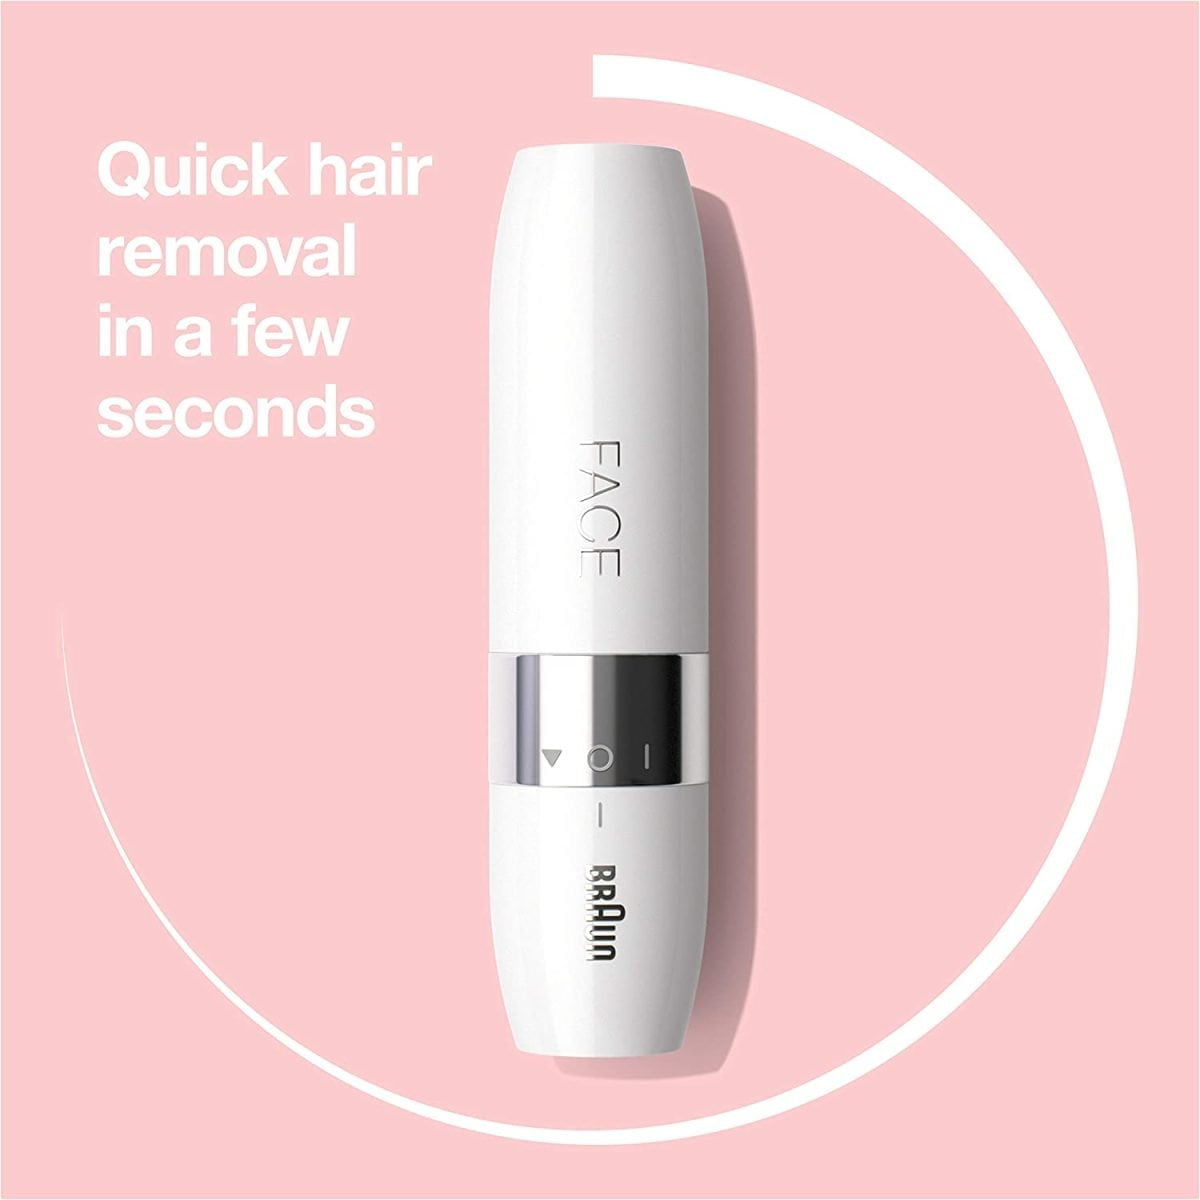 71Ewihmaul. Ac Sl1500 Braun &Lt;H1&Gt;Braun Face Mini Hair Remover Fs1000, Electric Facial Hair Removal For Women, White&Lt;/H1&Gt; Https://Www.youtube.com/Watch?V=Muwjqxidwc8 &Lt;Ul Class=&Quot;A-Unordered-List A-Vertical A-Spacing-Mini&Quot;&Gt; &Lt;Li&Gt;&Lt;Span Class=&Quot;A-List-Item&Quot;&Gt; Smooth Skin: Shaves Hair Cleanly And Close To The Skin, For Easier Makeup Application &Lt;/Span&Gt;&Lt;/Li&Gt; &Lt;Li&Gt;&Lt;Span Class=&Quot;A-List-Item&Quot;&Gt; Gentle &Amp; Discreet: Built For Efficient And Sensitive Facial Hair Removal For Women &Lt;/Span&Gt;&Lt;/Li&Gt; &Lt;Li&Gt;&Lt;Span Class=&Quot;A-List-Item&Quot;&Gt; Quick &Amp; Easy: Mini-Sized Design For Portability - Efficient Facial Hair Removal Anytime, Anywhere &Lt;/Span&Gt;&Lt;/Li&Gt; &Lt;Li&Gt;&Lt;Span Class=&Quot;A-List-Item&Quot;&Gt; Precise: Spot And Isolate Hairs With The Facial Hair Remover'S Built-In Smart Light &Lt;/Span&Gt;&Lt;/Li&Gt; &Lt;Li&Gt;&Lt;Span Class=&Quot;A-List-Item&Quot;&Gt; Versatile: This Facial Shaver For Women Is Easily Usable On Tricky Areas Of The Face &Lt;/Span&Gt;&Lt;/Li&Gt; &Lt;/Ul&Gt; Hair Removal Braun Face Mini Hair Remover Fs1000, Electric Facial Hair Removal For Women, White